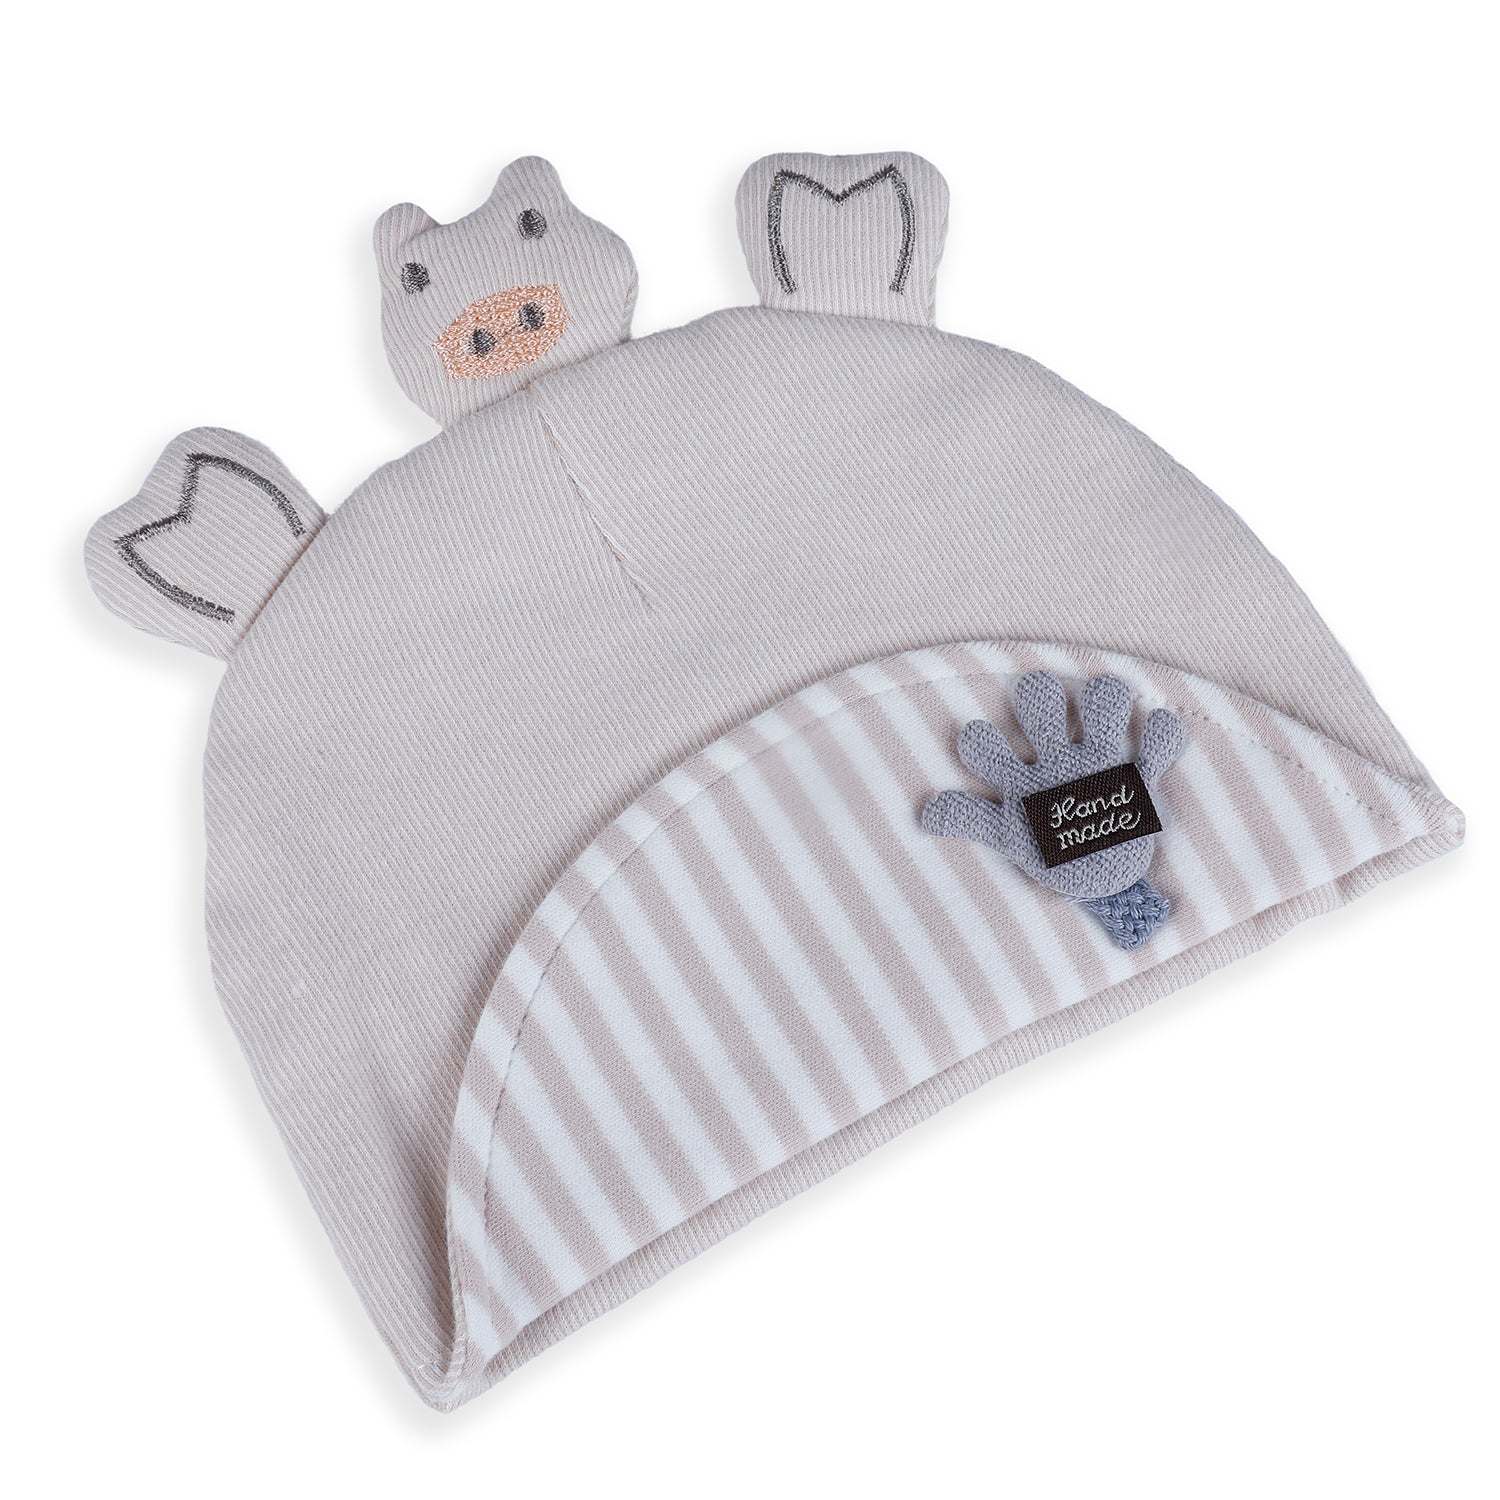 Baby Moo Cute Turtle Toddlers Cotton Cap - Beige - Baby Moo